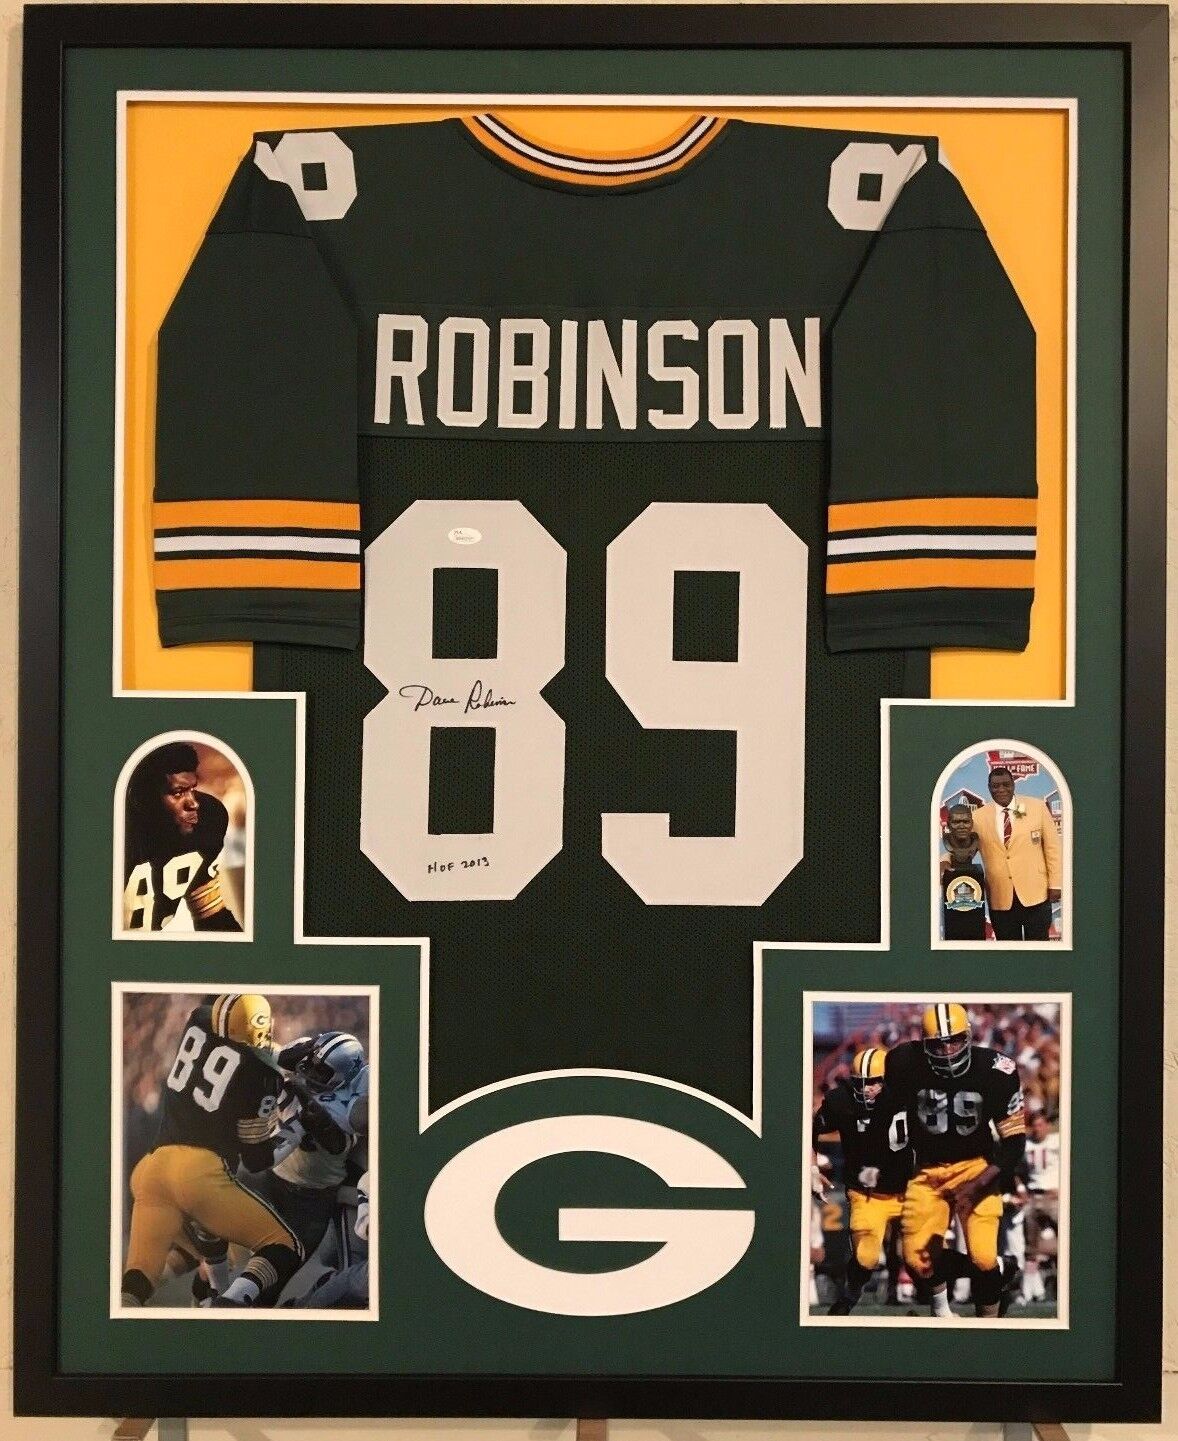 MVP Authentics Framed Dave Robinson Autographed Signed Inscribe Greenbay Packers Jersey Jsa Coa 450 sports jersey framing , jersey framing